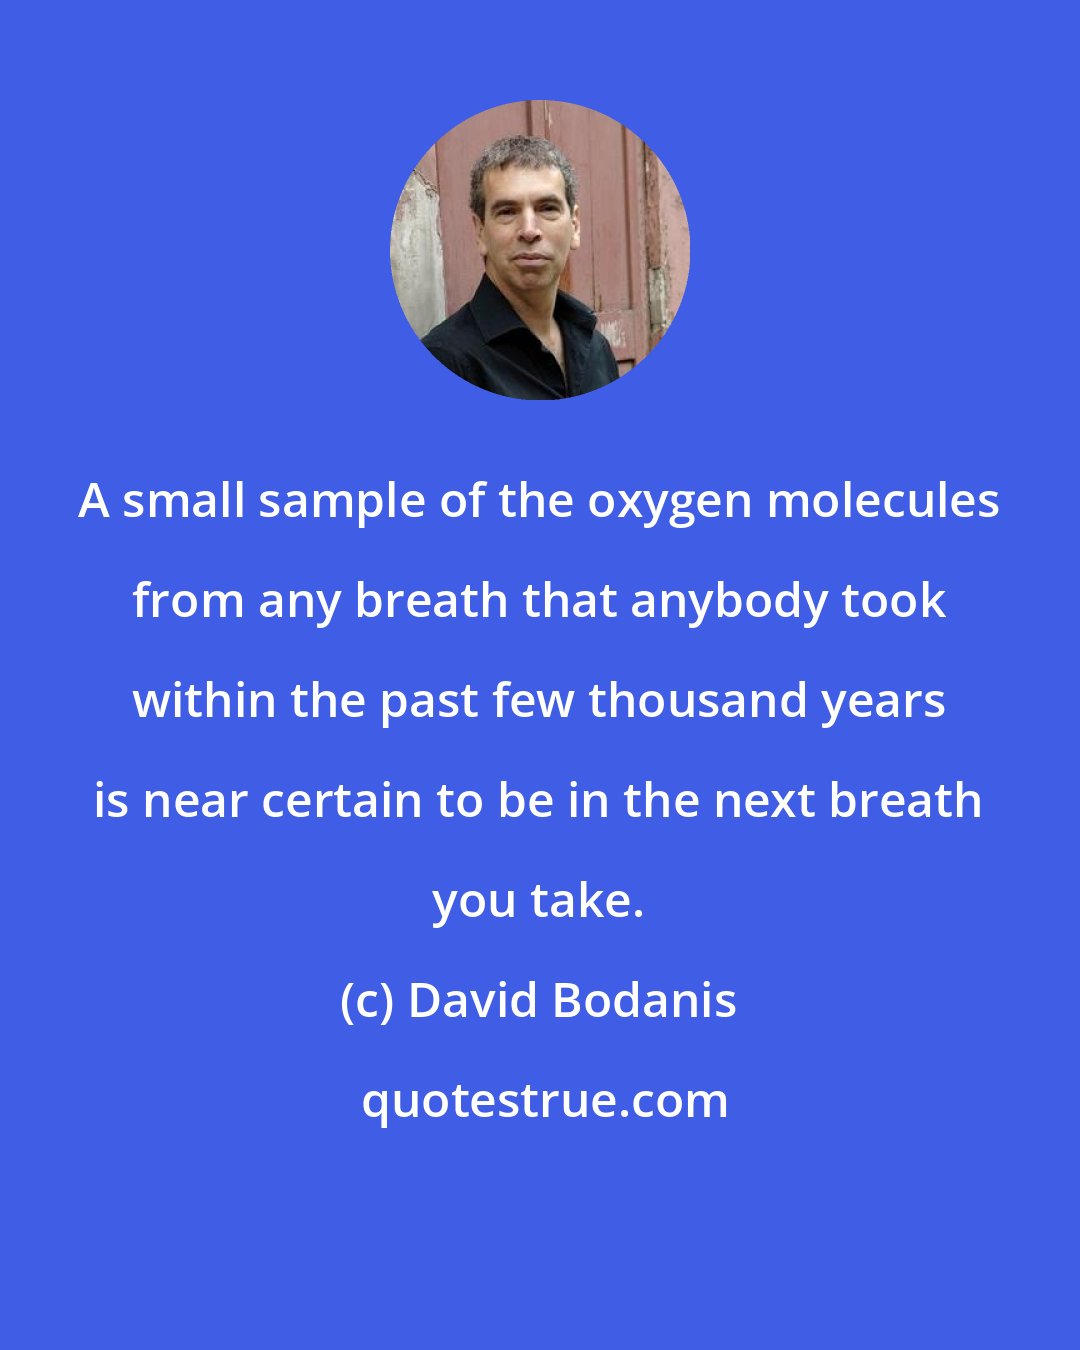 David Bodanis: A small sample of the oxygen molecules from any breath that anybody took within the past few thousand years is near certain to be in the next breath you take.